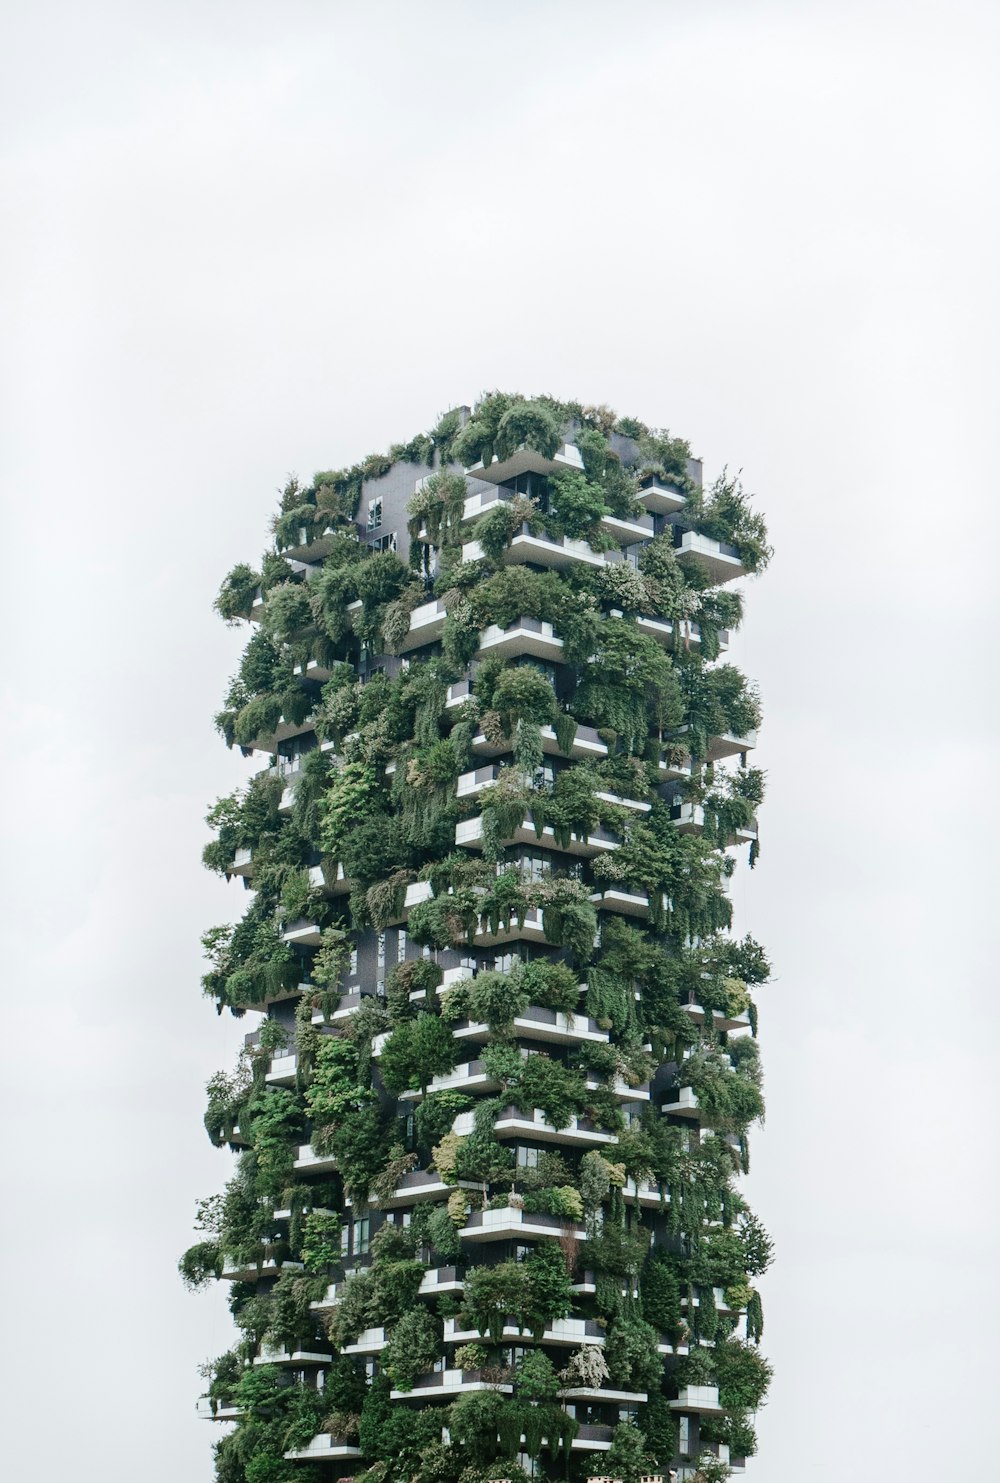 building with plants